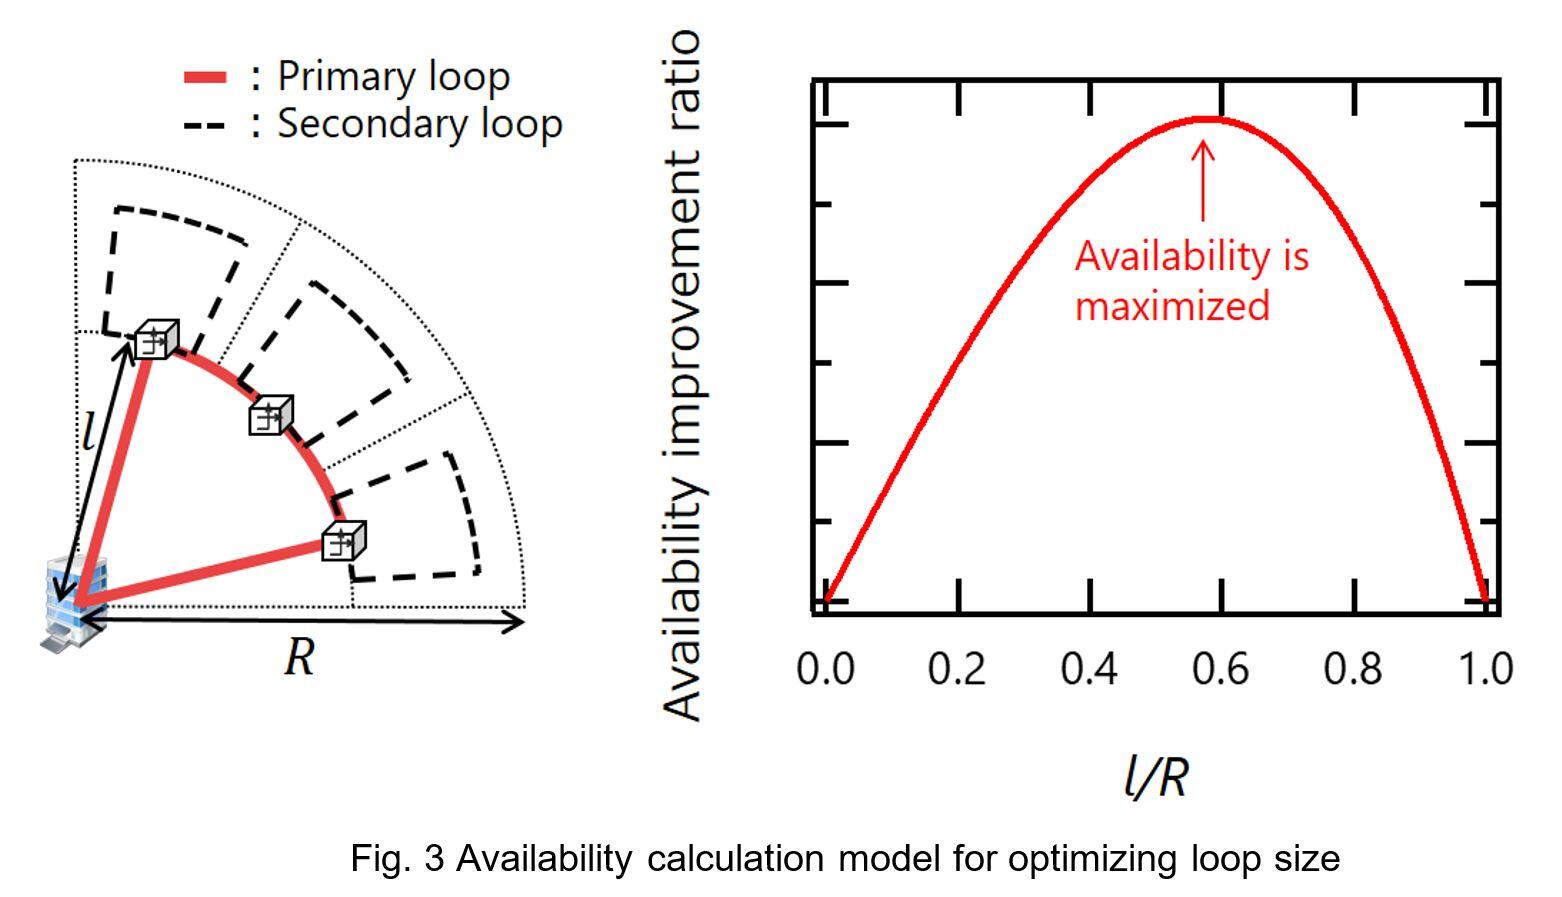 Fig. 3 Availability calculation model for optimizing loop size